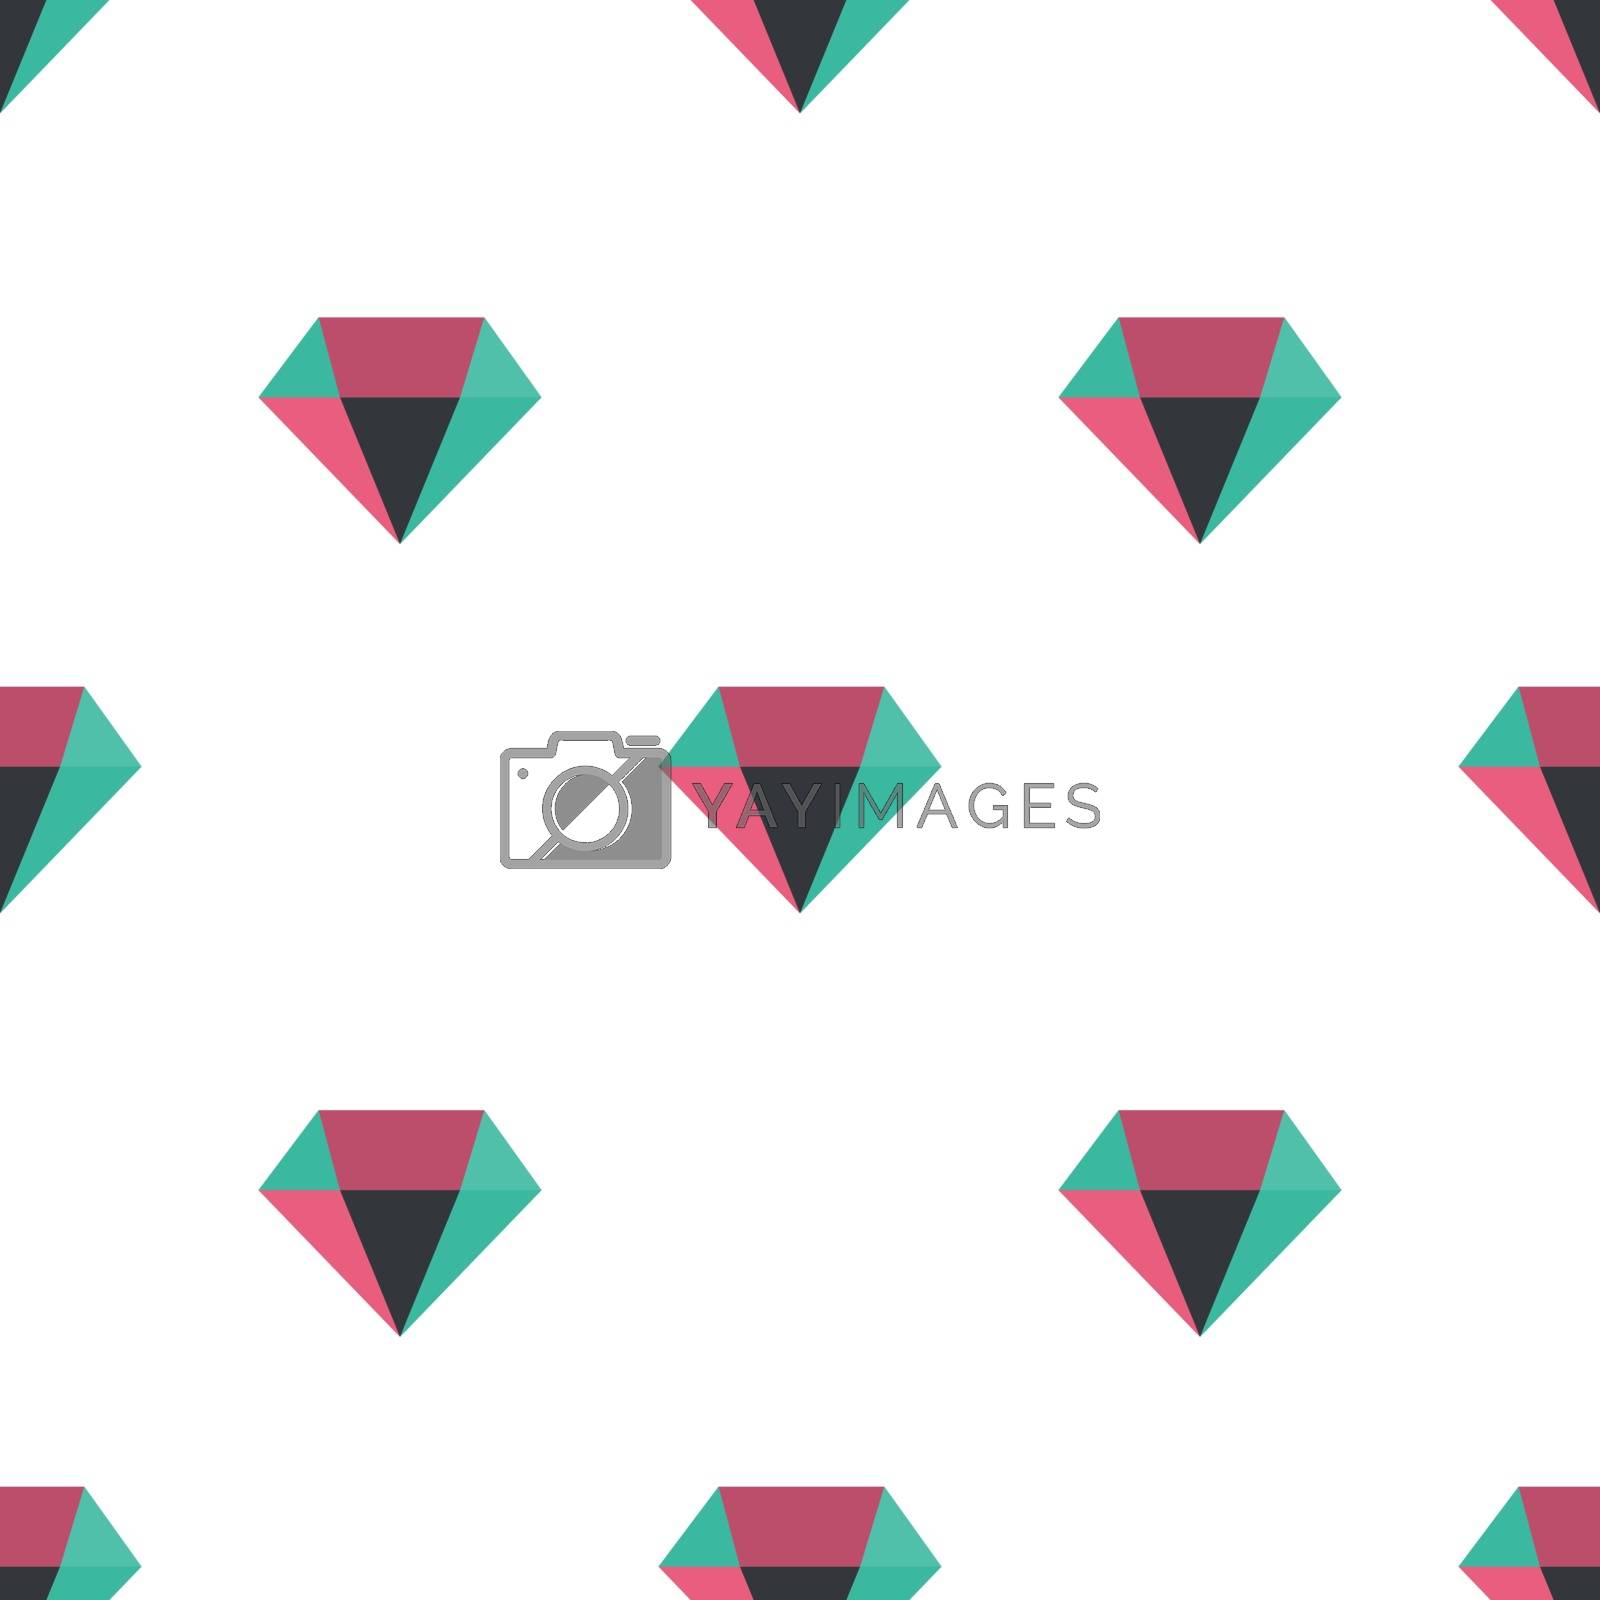 Royalty free image of Diamond pattern, vector seamless background. Decorative illustration by natali_brill